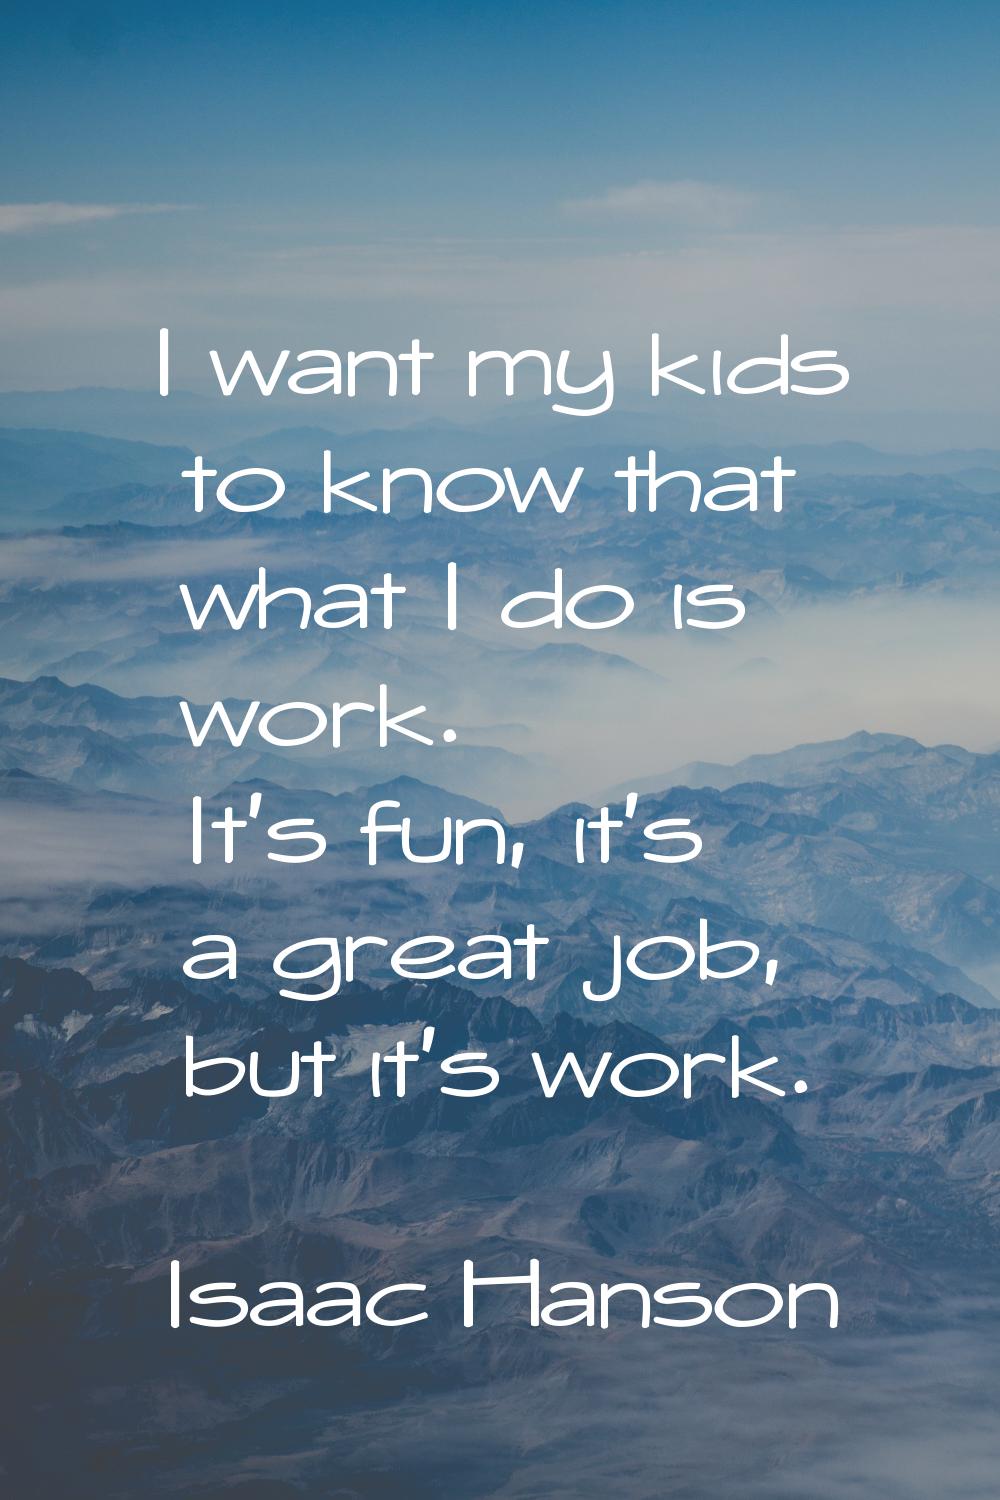 I want my kids to know that what I do is work. It's fun, it's a great job, but it's work.